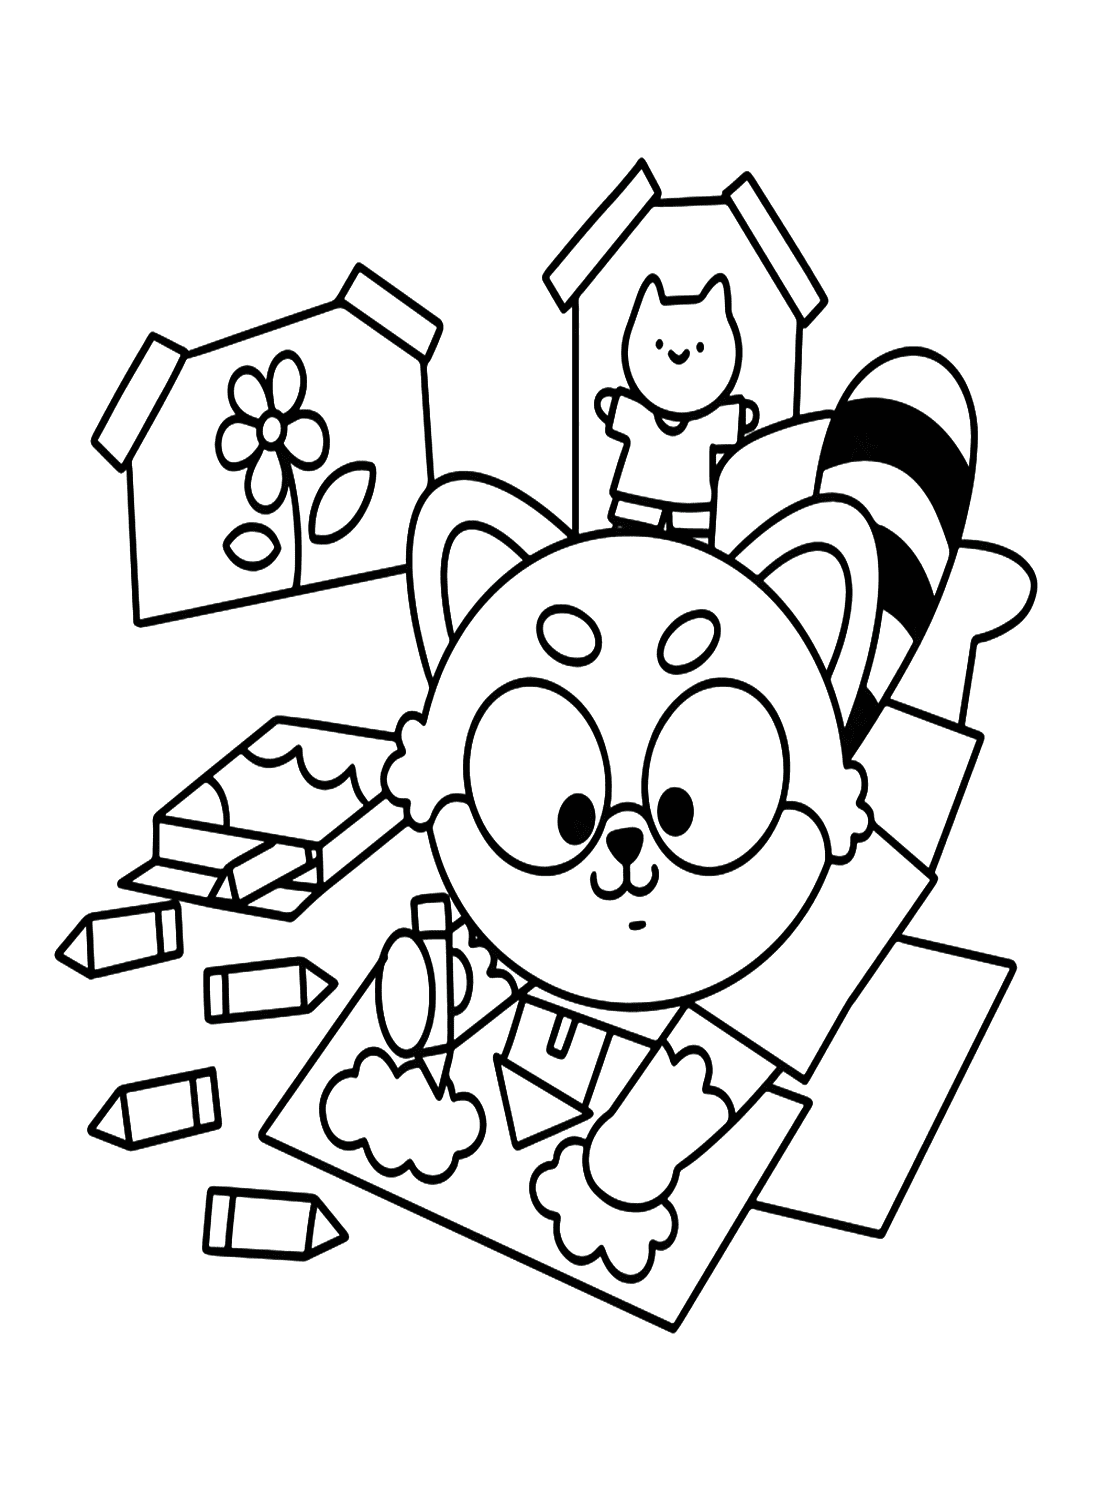 Little Raccoon Drawing House from Raccoon